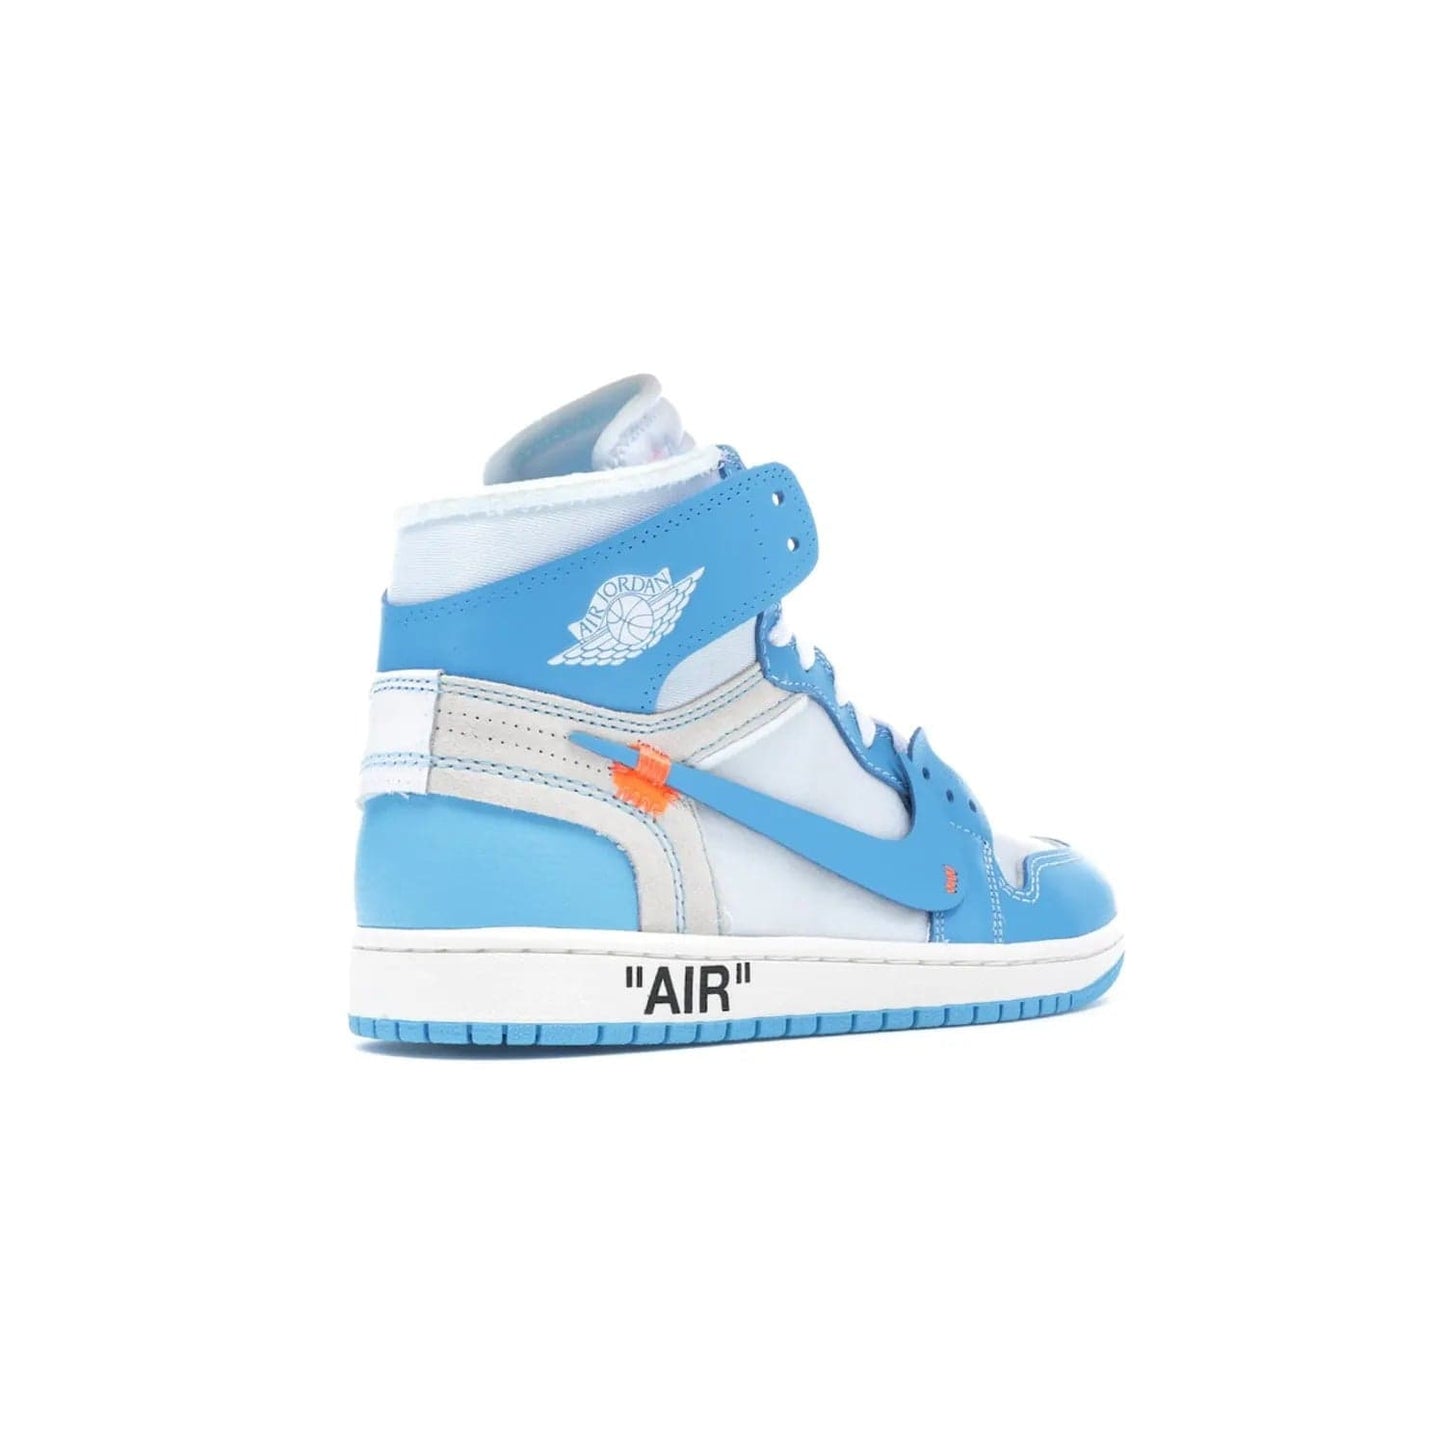 Jordan 1 Retro High Off-White University Blue - Image 33 - Only at www.BallersClubKickz.com - Classic Jordan 1 Retro High "Off-White UNC" sneakers meld style and comfort. Boasting deconstructed white and blue leather, Off-White detailing, and a white, dark powder blue and cone colorway, these sneakers are perfect for dressing up or down. Get the iconic Off-White Jordan 1's and upgrade your look.